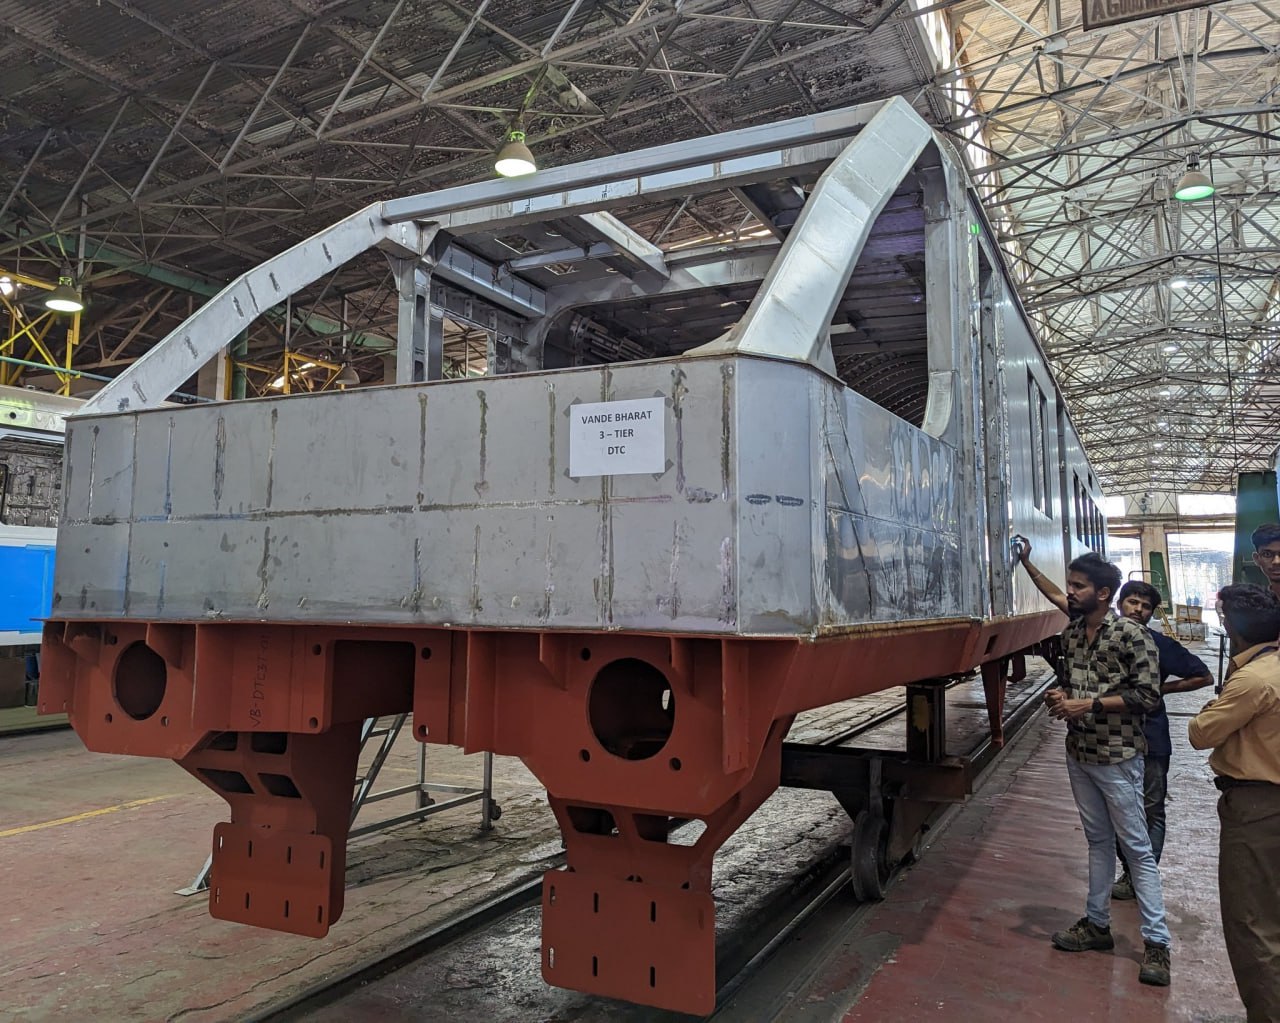 The car body of the first Vande Bharat EMU with sleeper cars